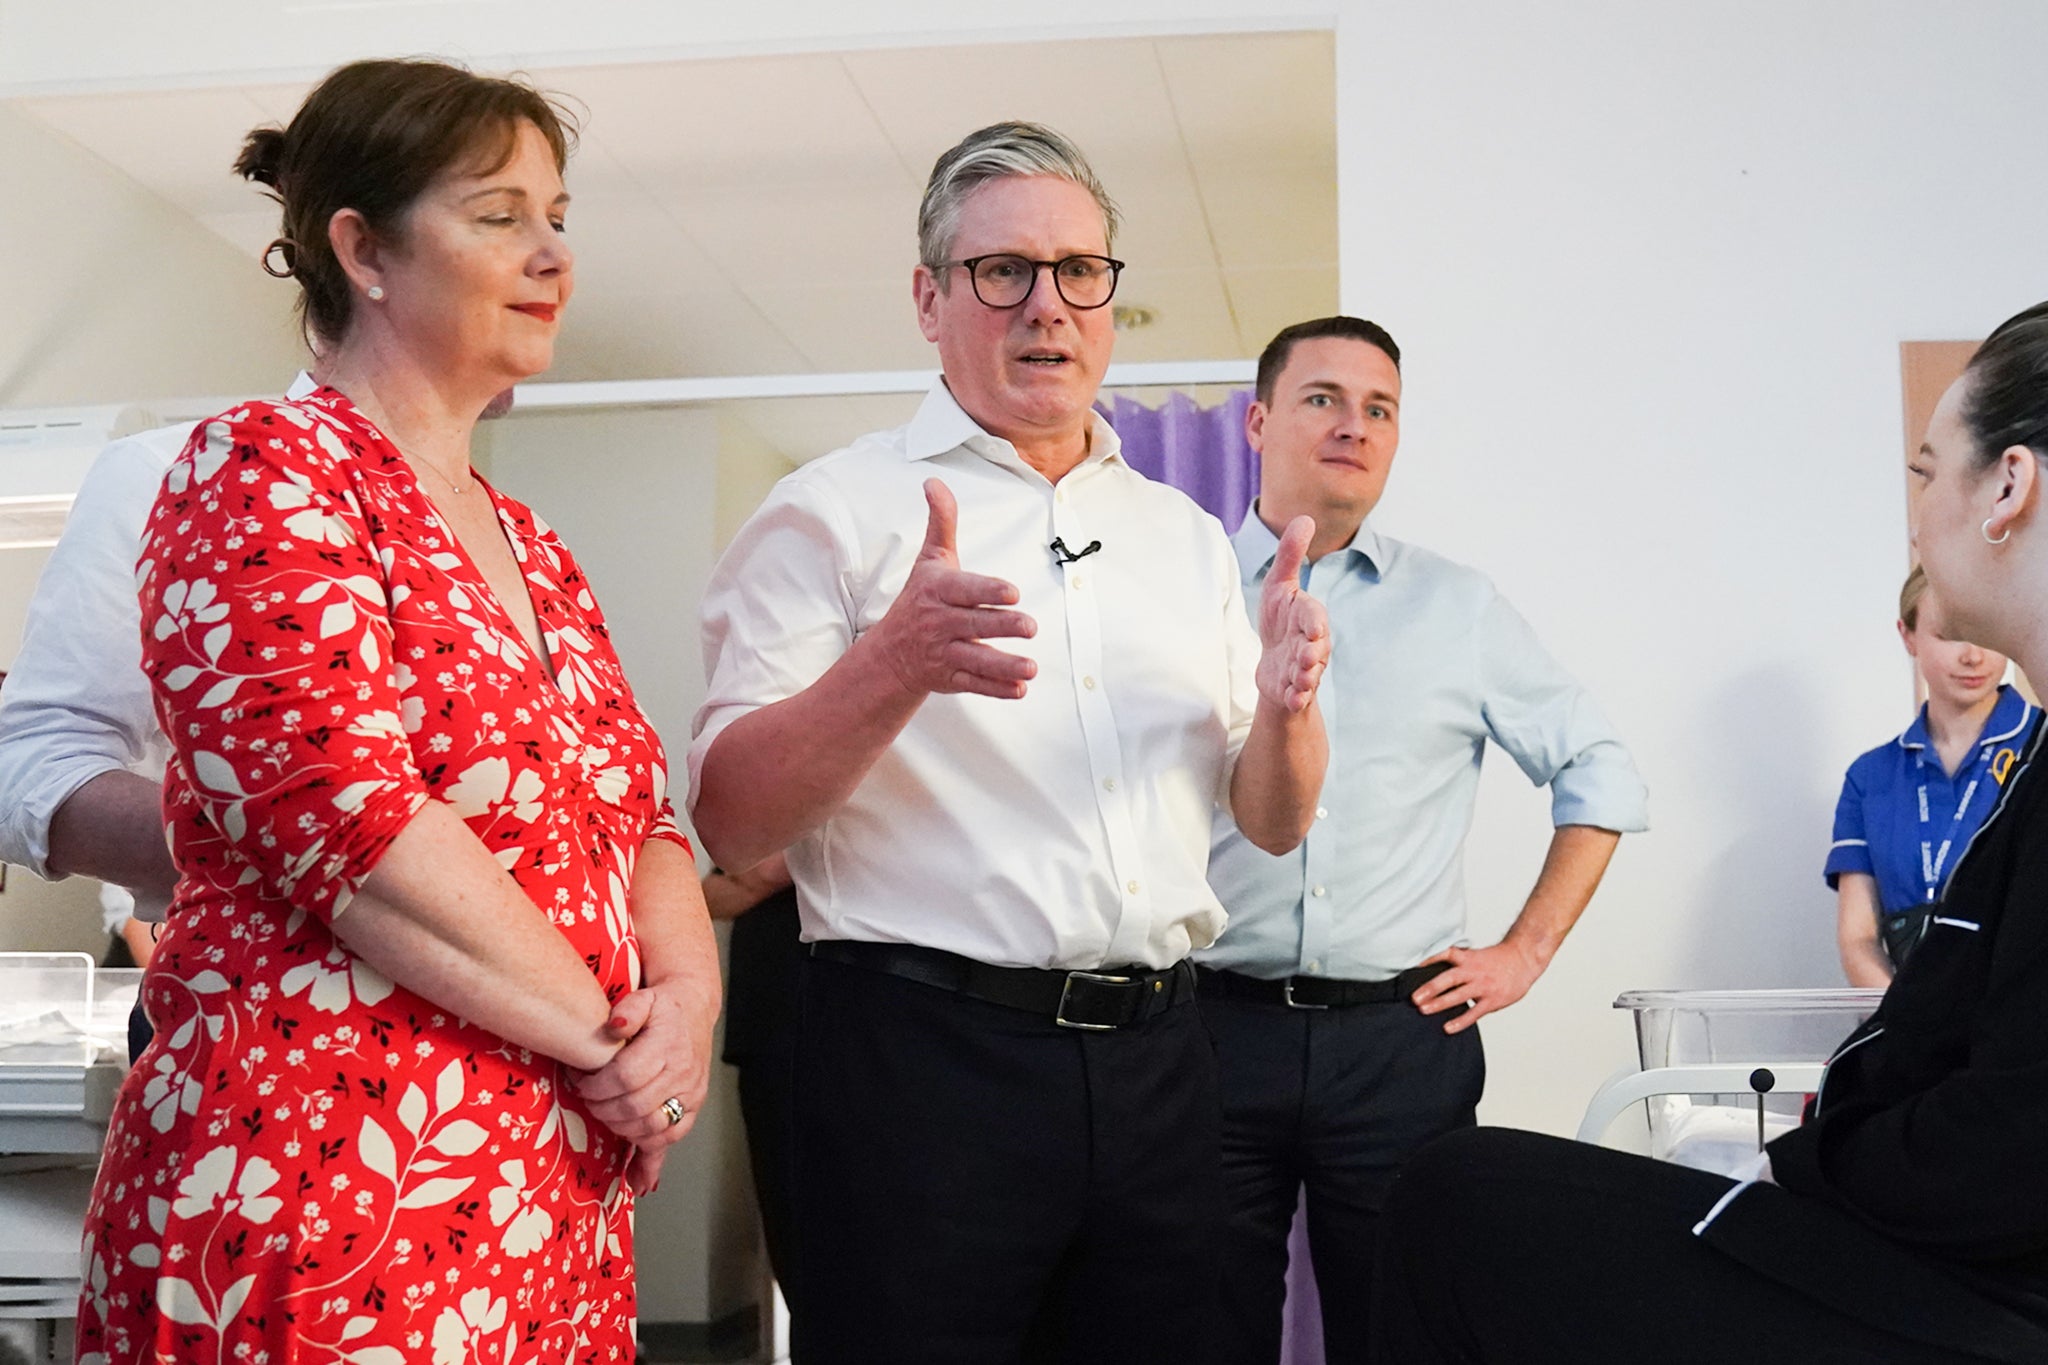 Labour leader Keir Starmer and shadow health secretary Wes Streeting visit King’s Mill Hospital in Sutton, southwest London, on Monday